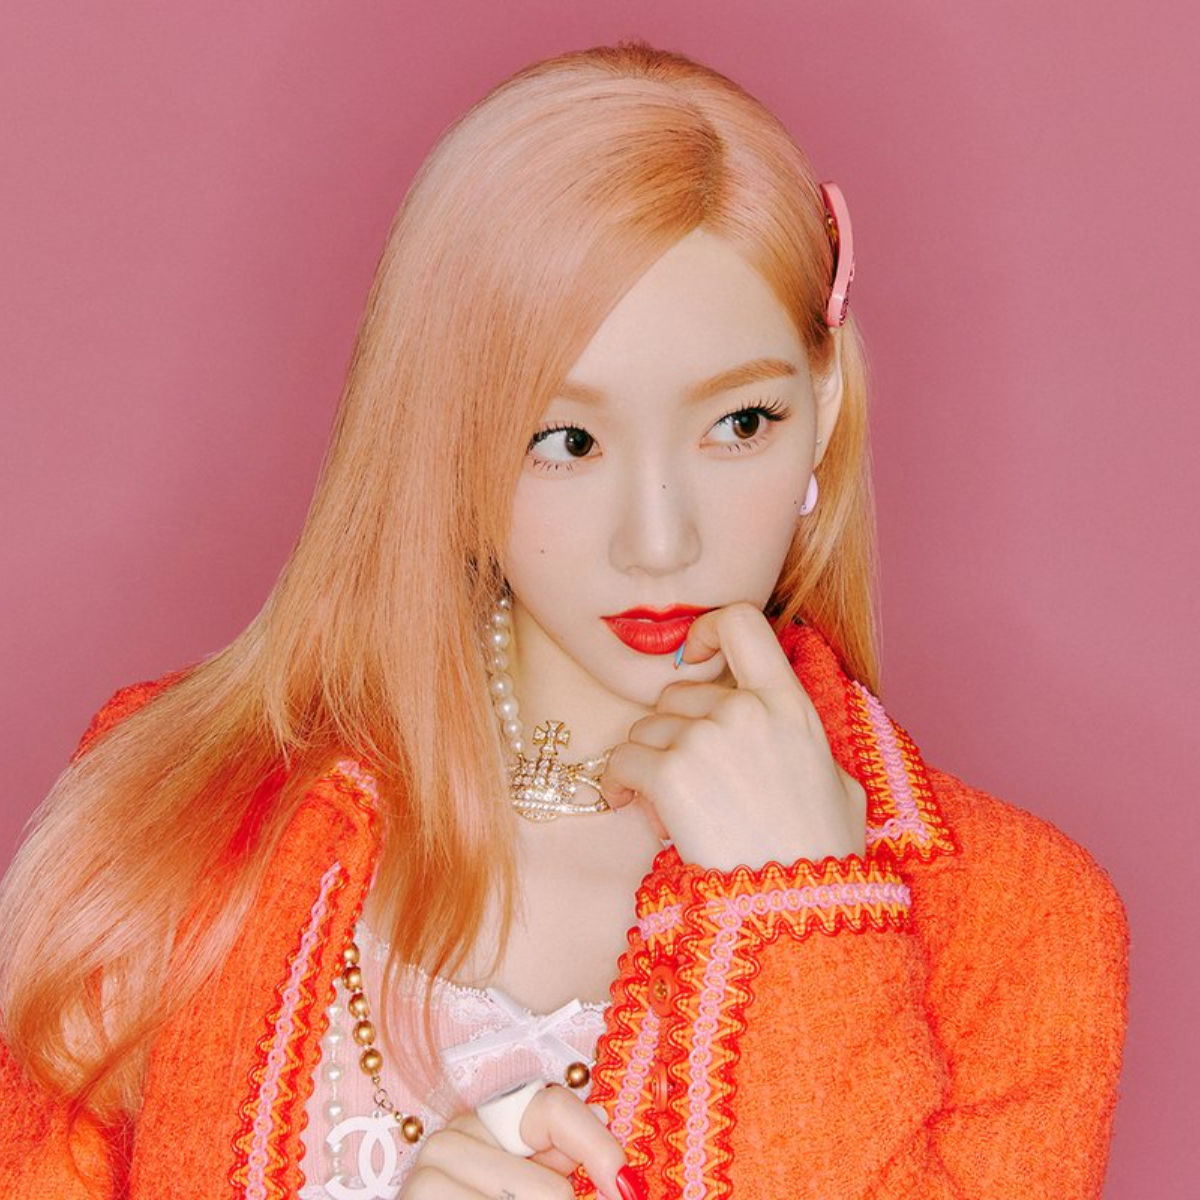 Girls&#039; Generation&#039;s Taeyeon poses for the concept photo of &#039;Weekend&#039;